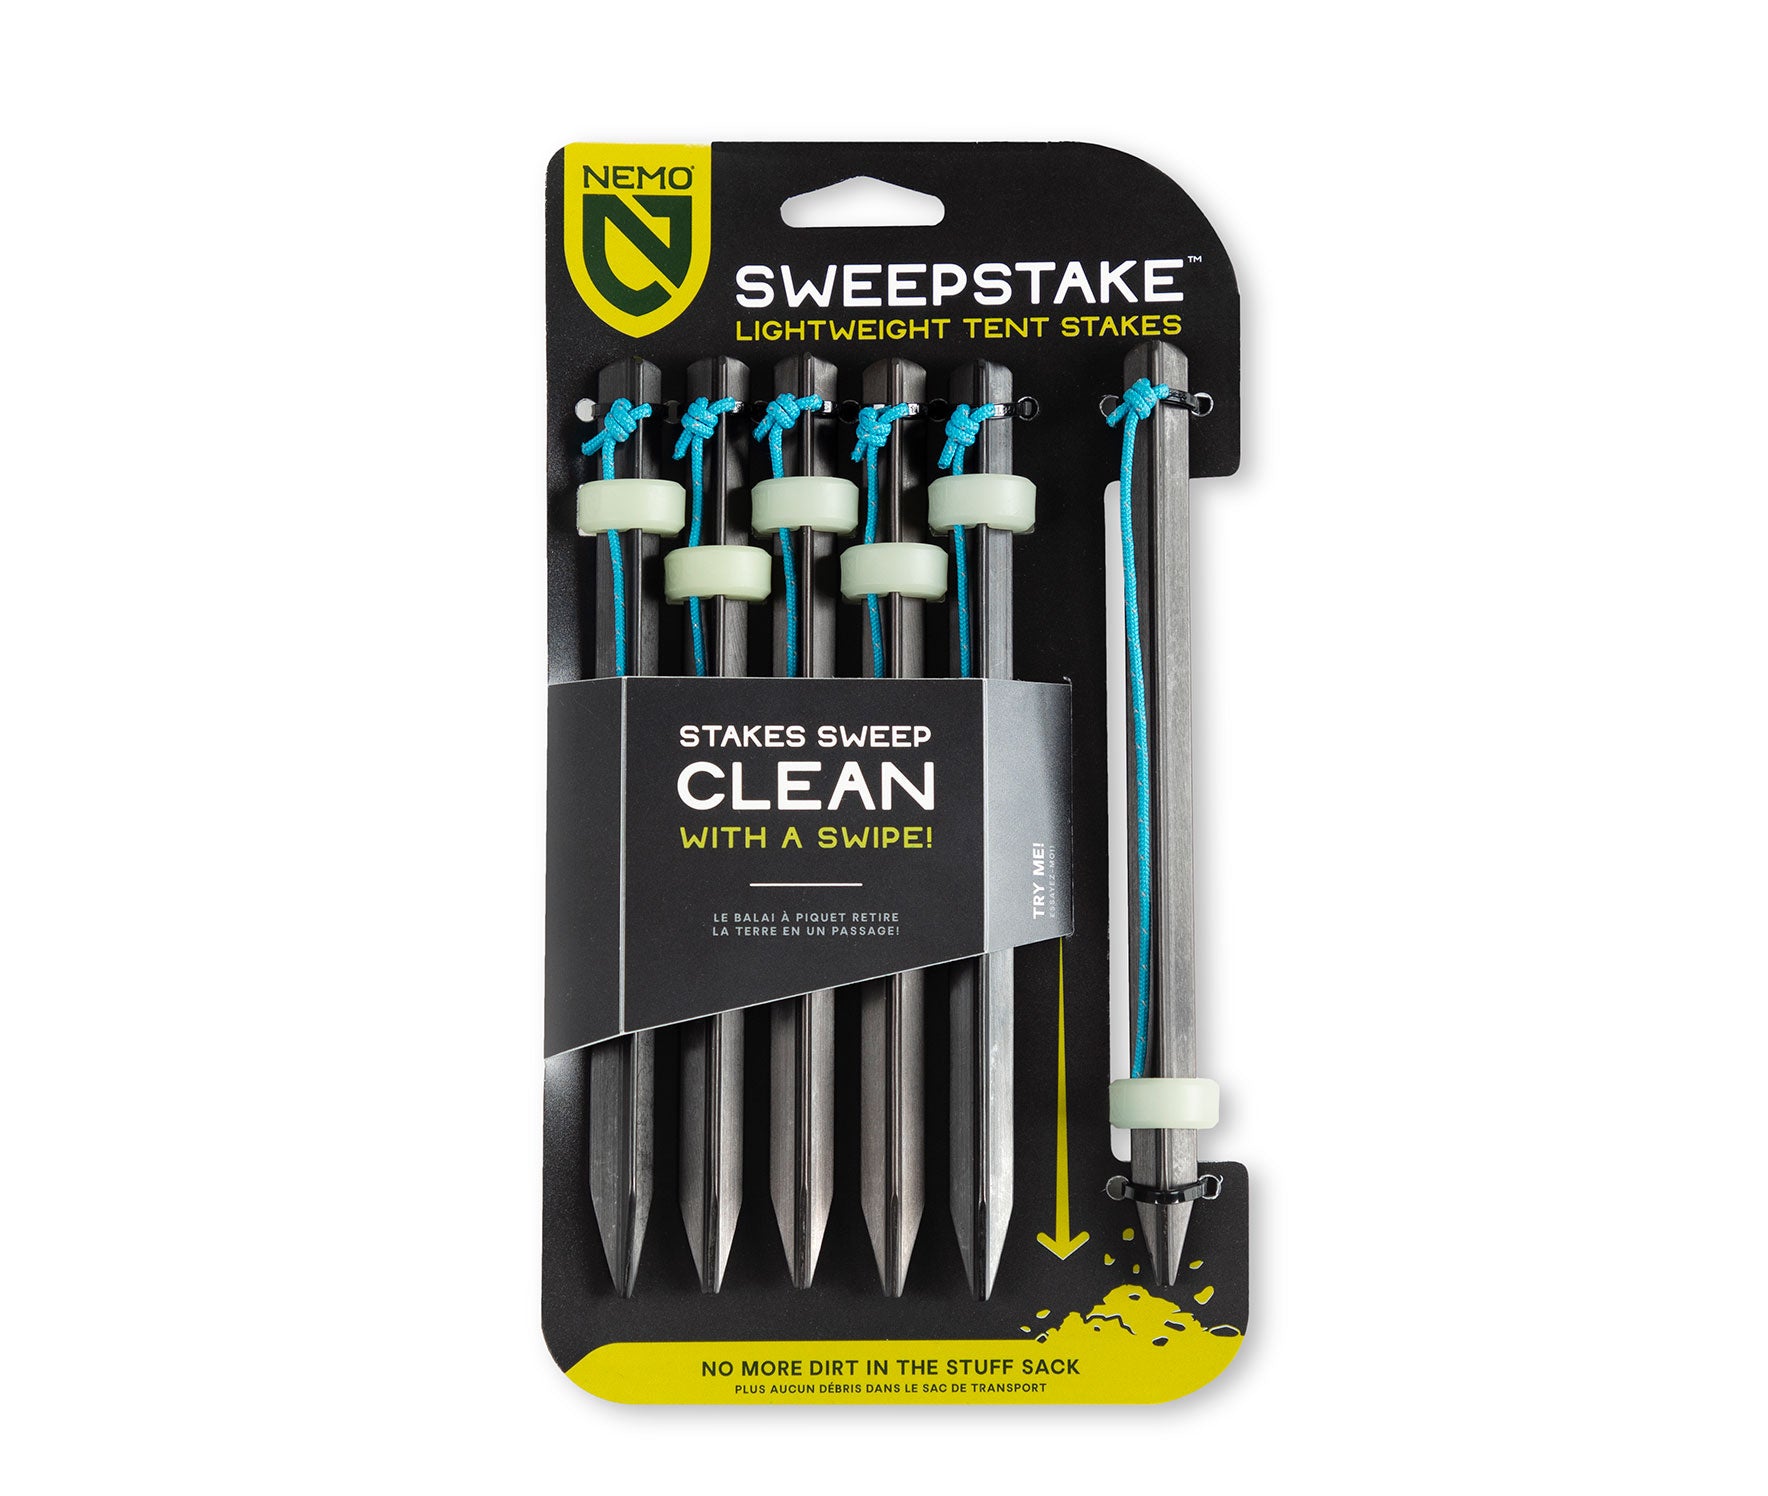 Nemo Sweepstake Lightweight Tent Stakes (6-Pack)